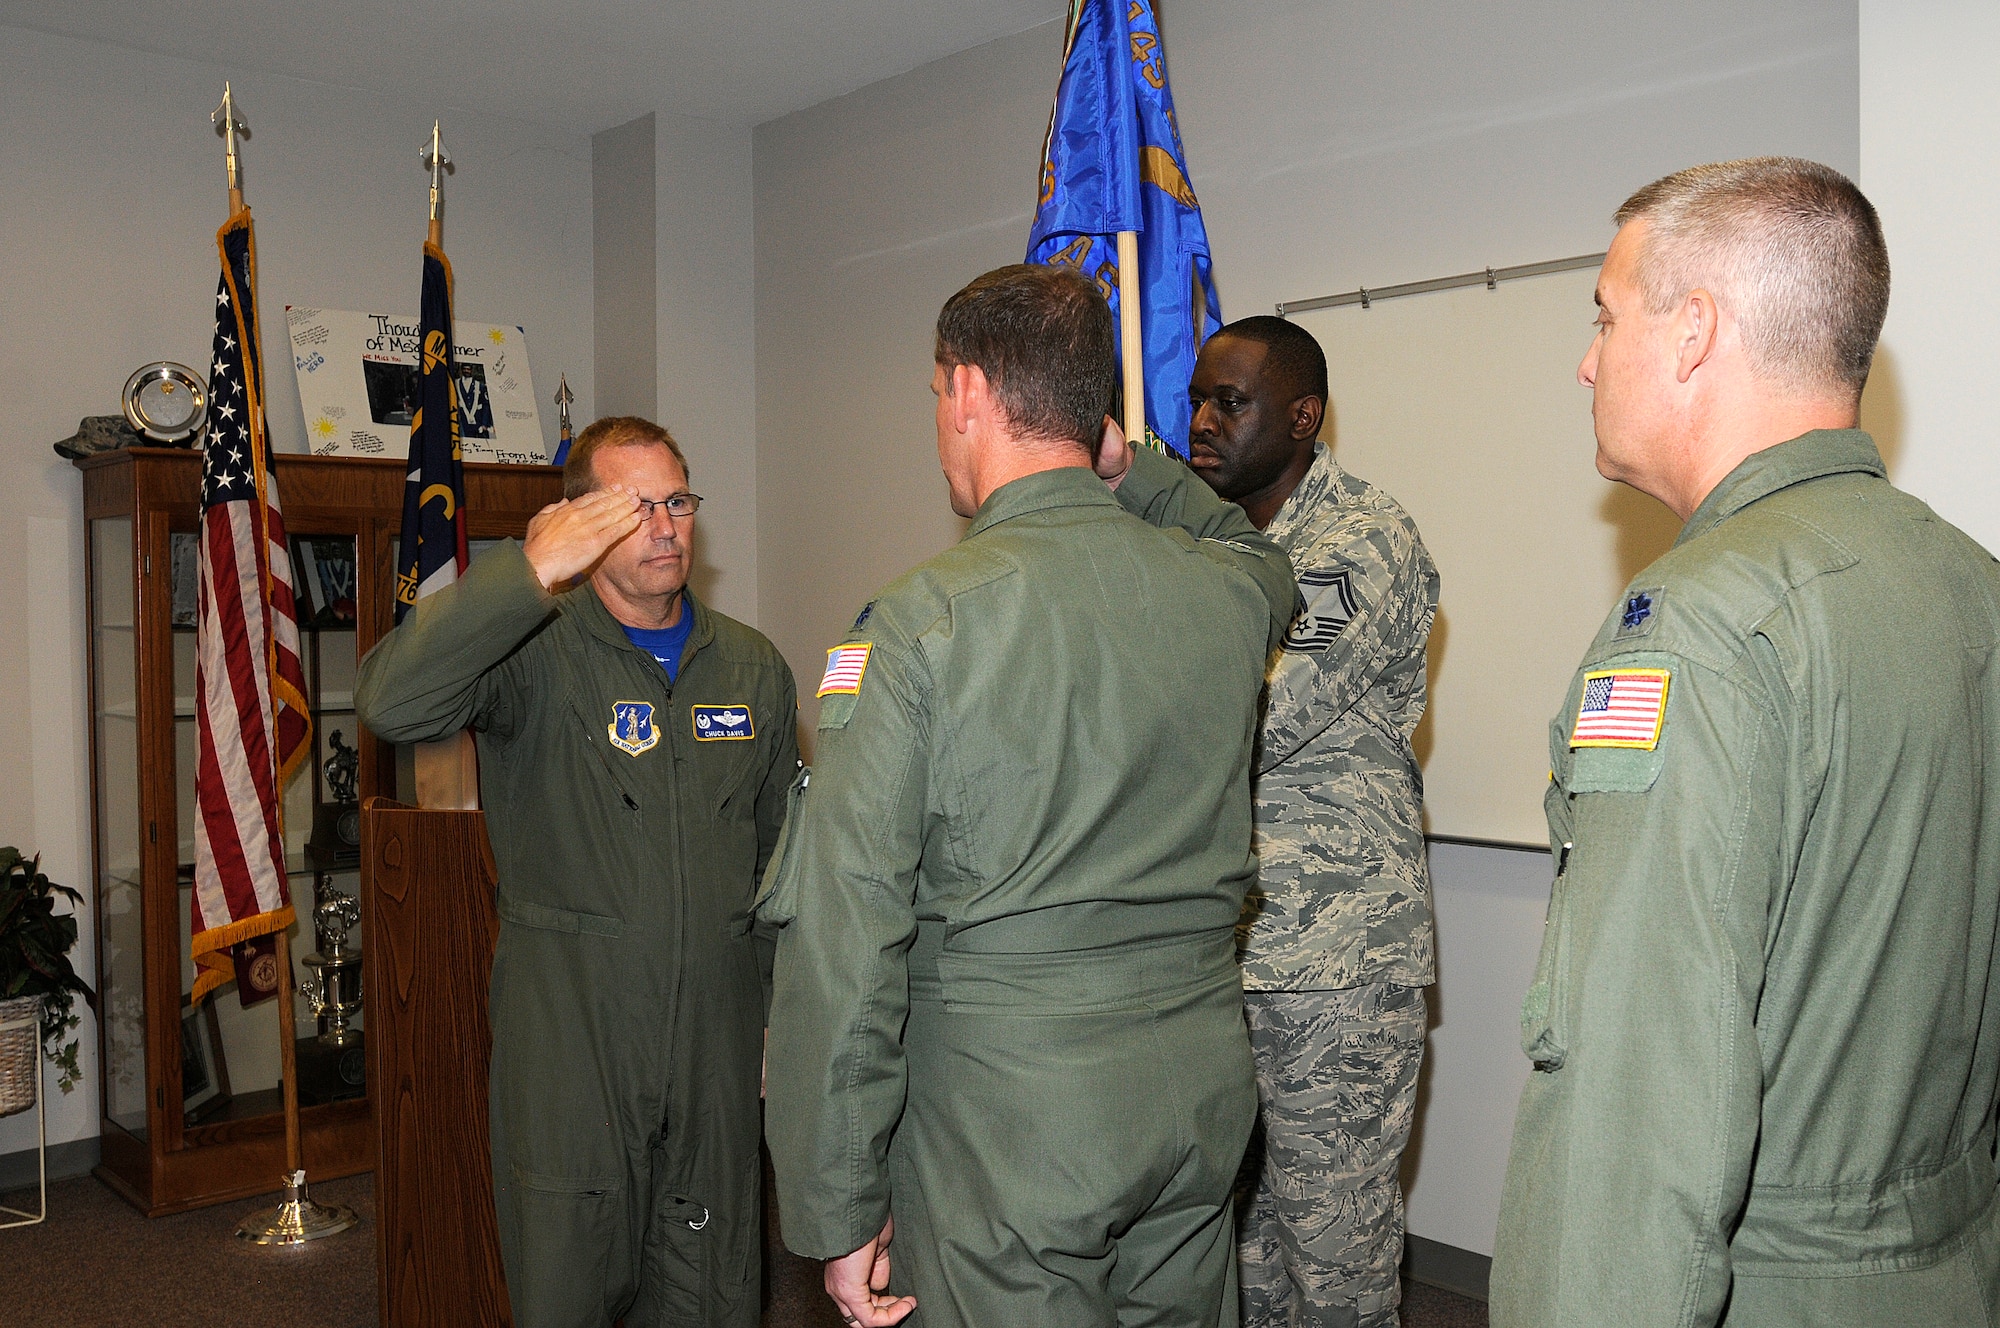 U.S. Air Force Lt. Col. Miles K. Harkey relinquishes command of the 145th Operations Support Squadron and assumes command of the 156th Airlift Squadron, June 6, 2015. Col. Charles D. Davis III, commander, 145th Operations Group officiated the change of command ceremony held at the North Carolina Air National Guard Base, Charlotte Douglas International Airport. (U.S. Air National Guard photo by Senior Airman Laura Montgomery, 145th Public Affairs/Released)